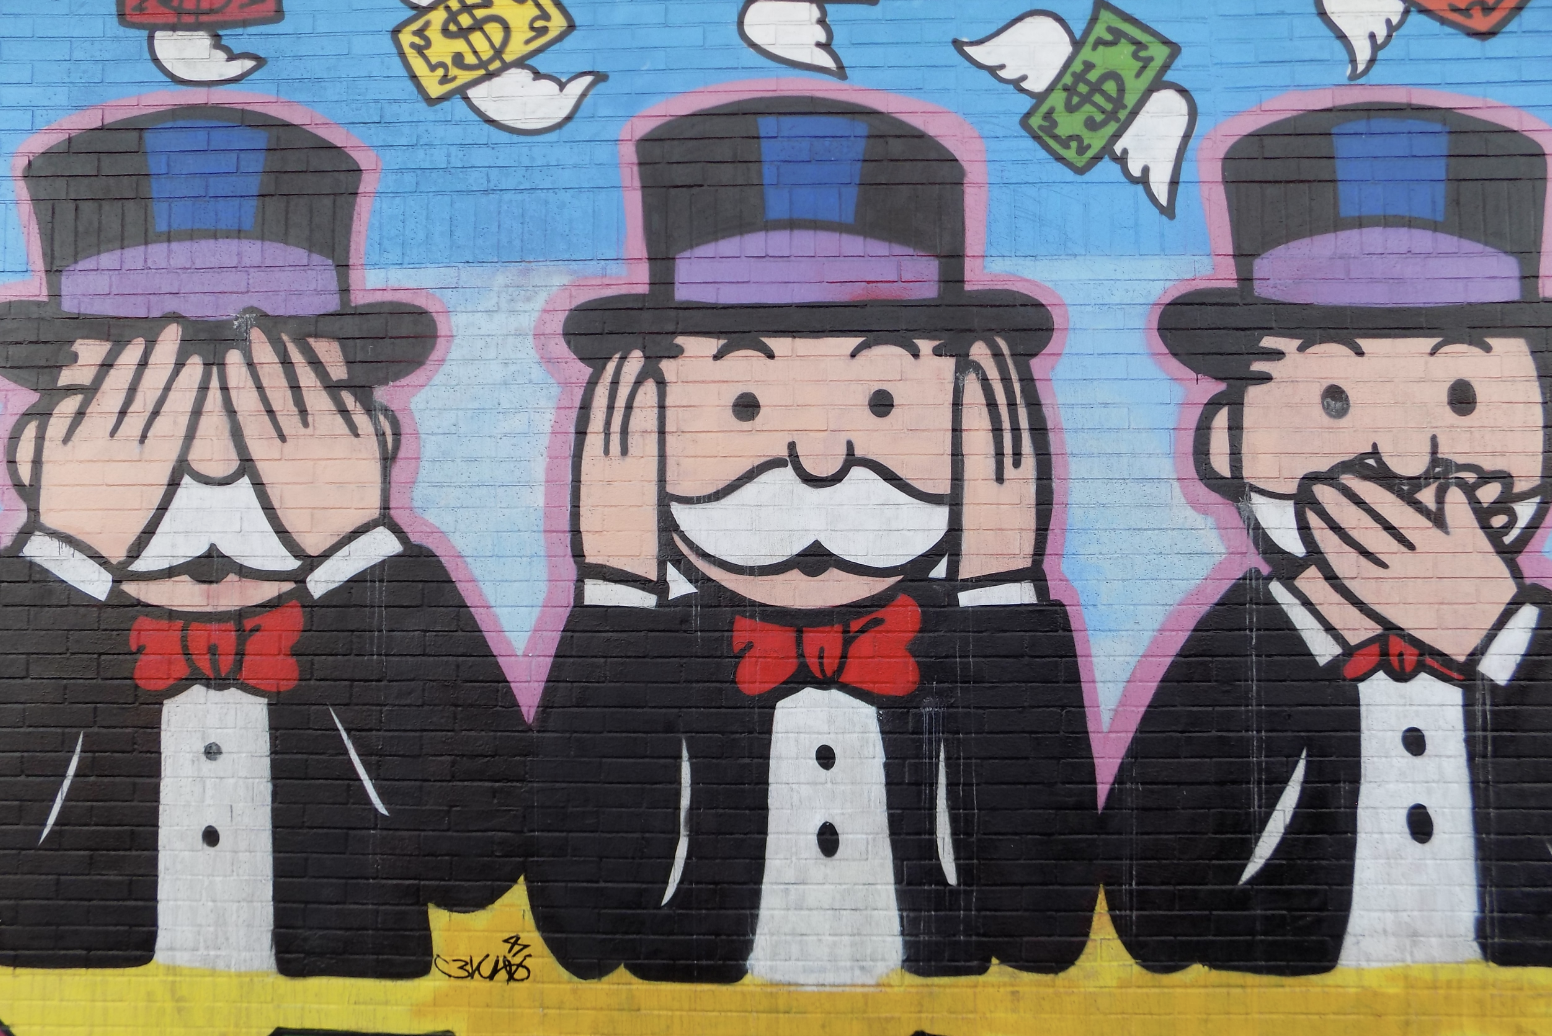 Buy Sell Love Durham blog featured image of the Monopoly Man, talking about house flipping